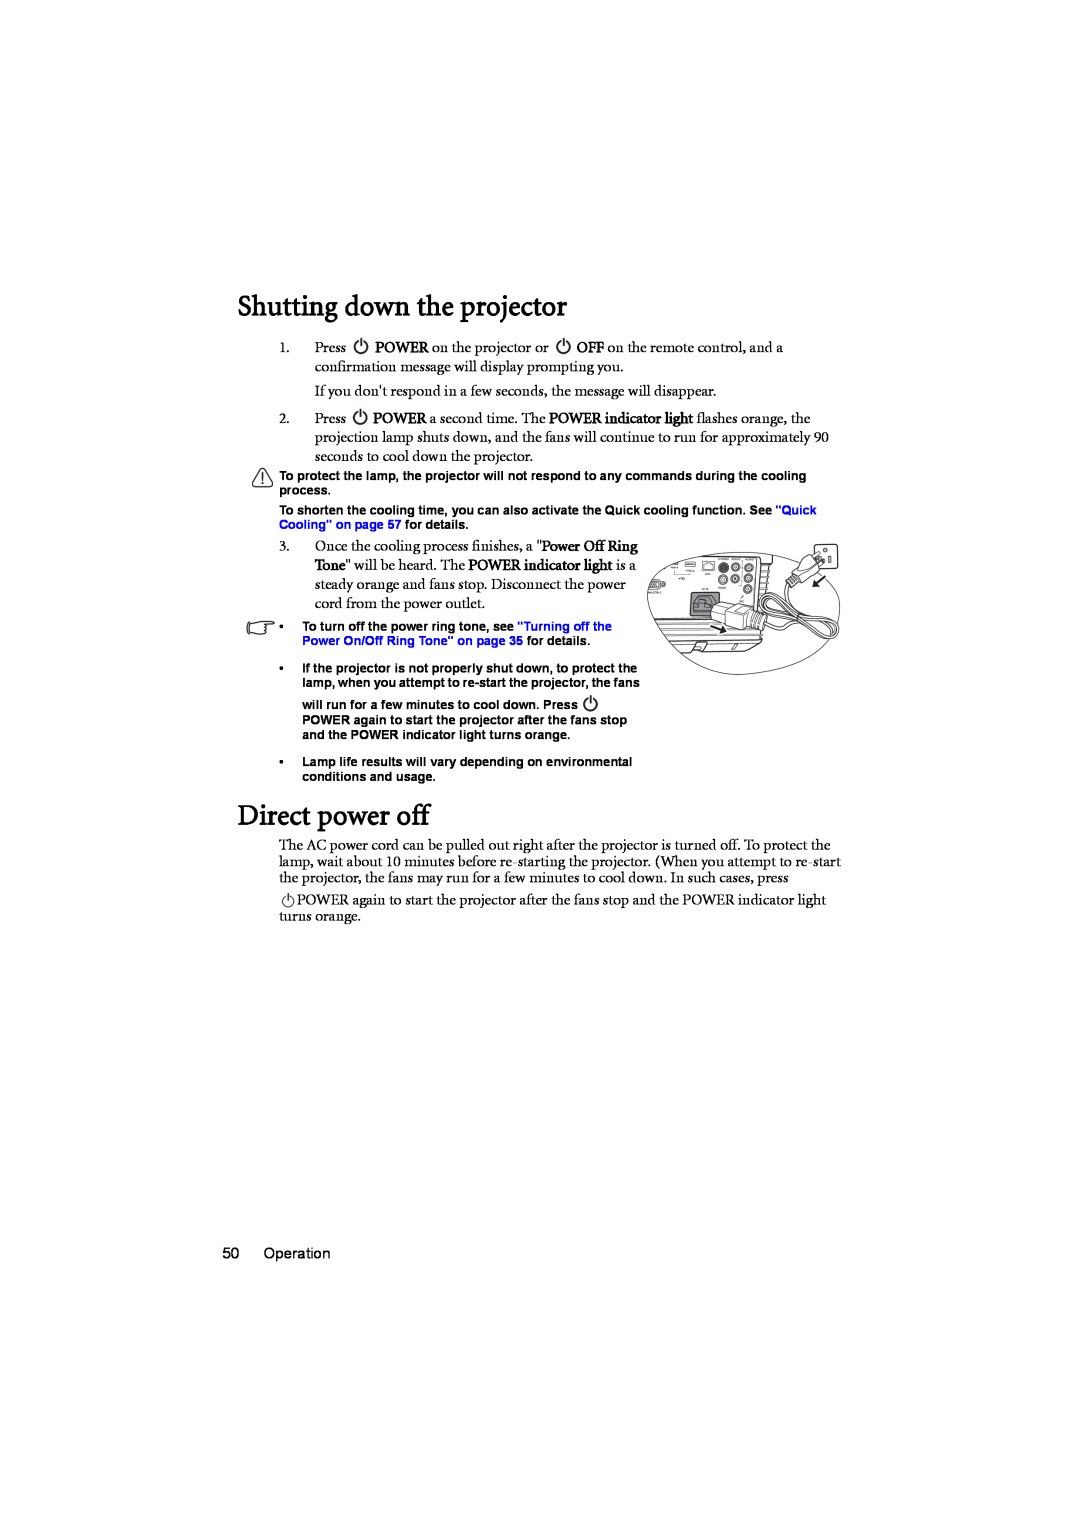 BenQ MX880UST user manual Shutting down the projector, Direct power off 